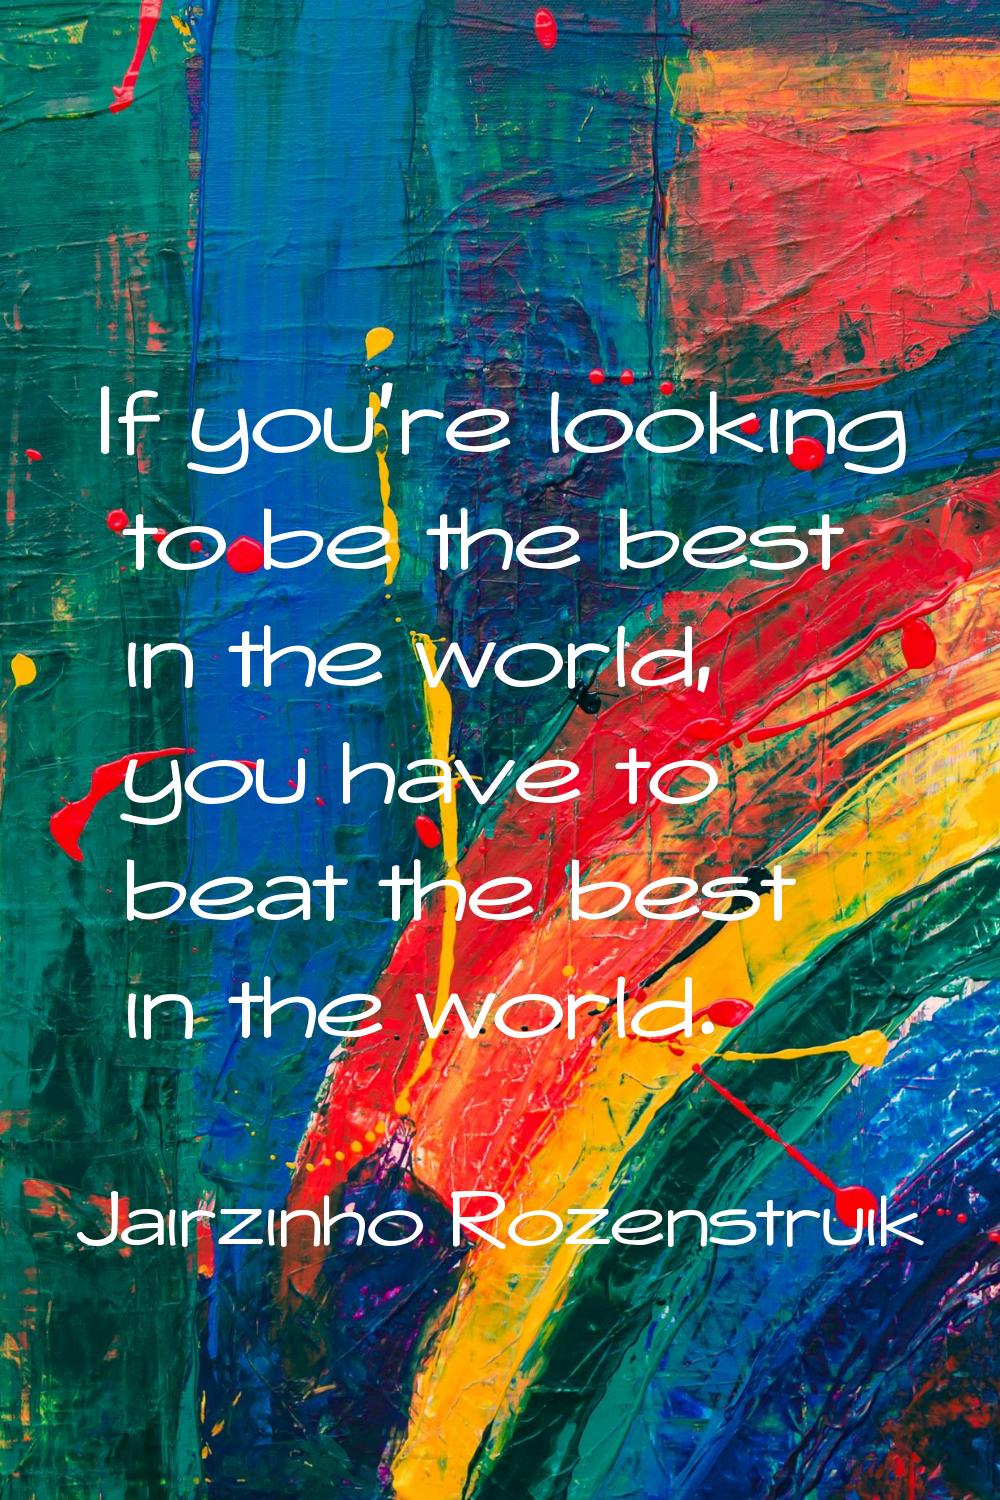 If you're looking to be the best in the world, you have to beat the best in the world.